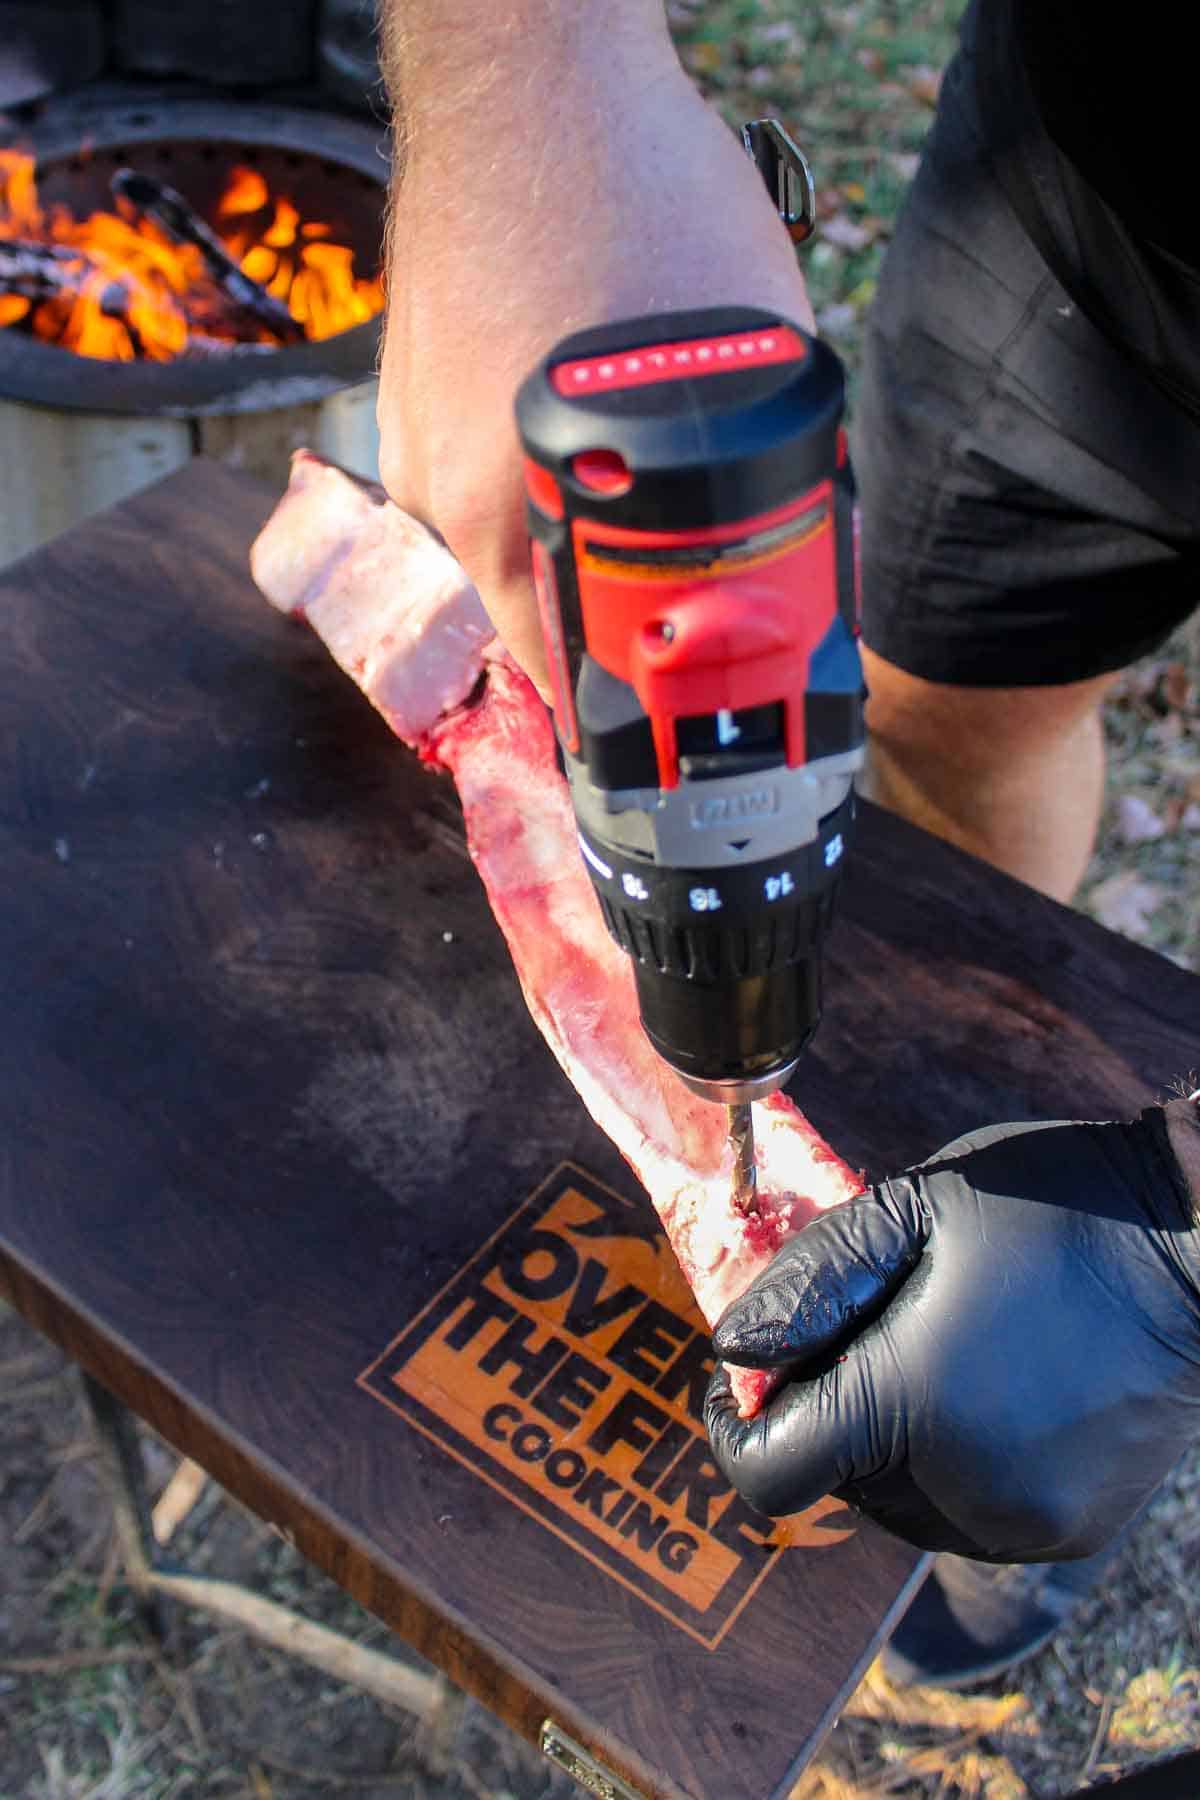 Drilling a hole in the tomahawk.